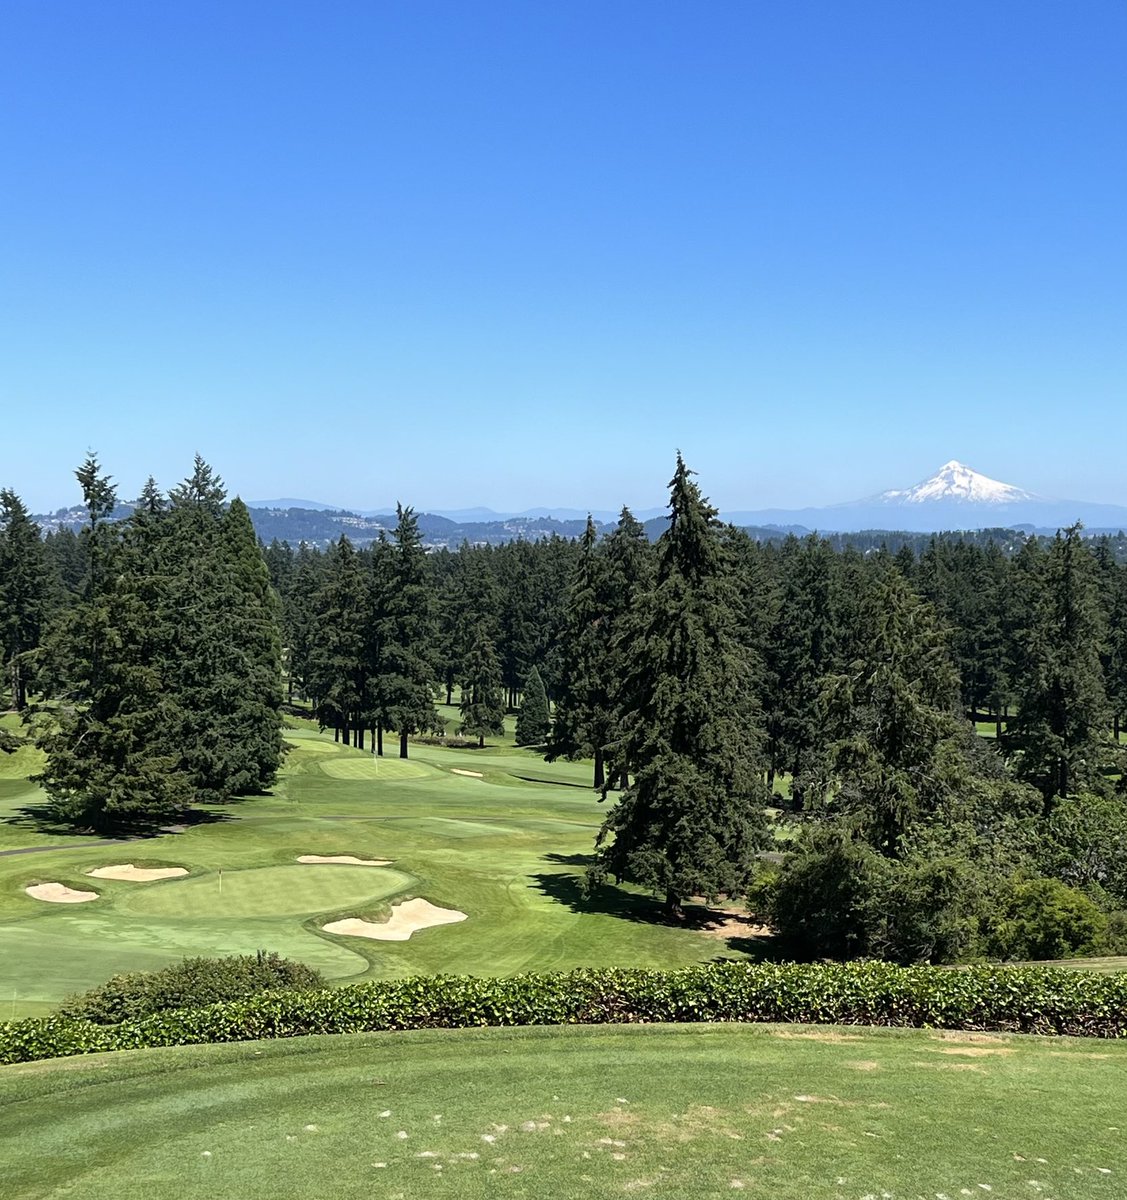 lake Oswego Country Club with Mount Hood in the background…wishing my golf game was as beautiful 😎